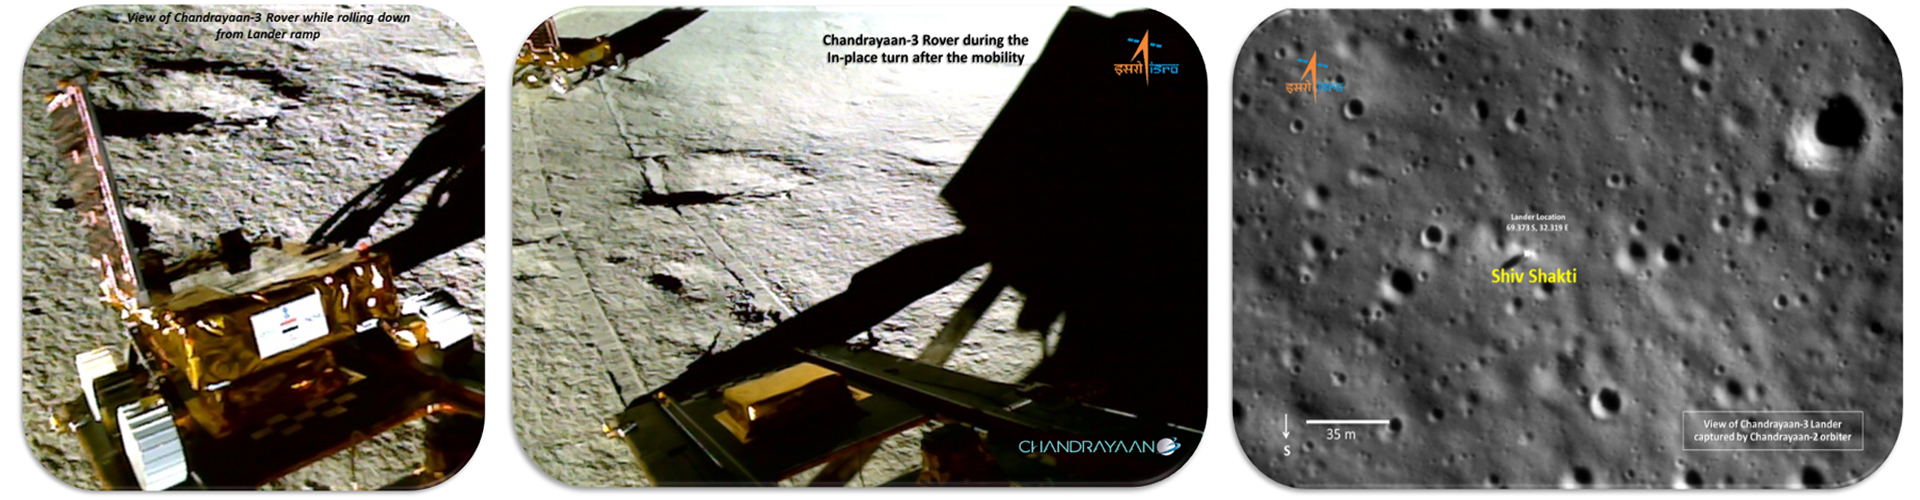 Image of Glimpses of Chandrayan - 3 Landing on Lunar Surface